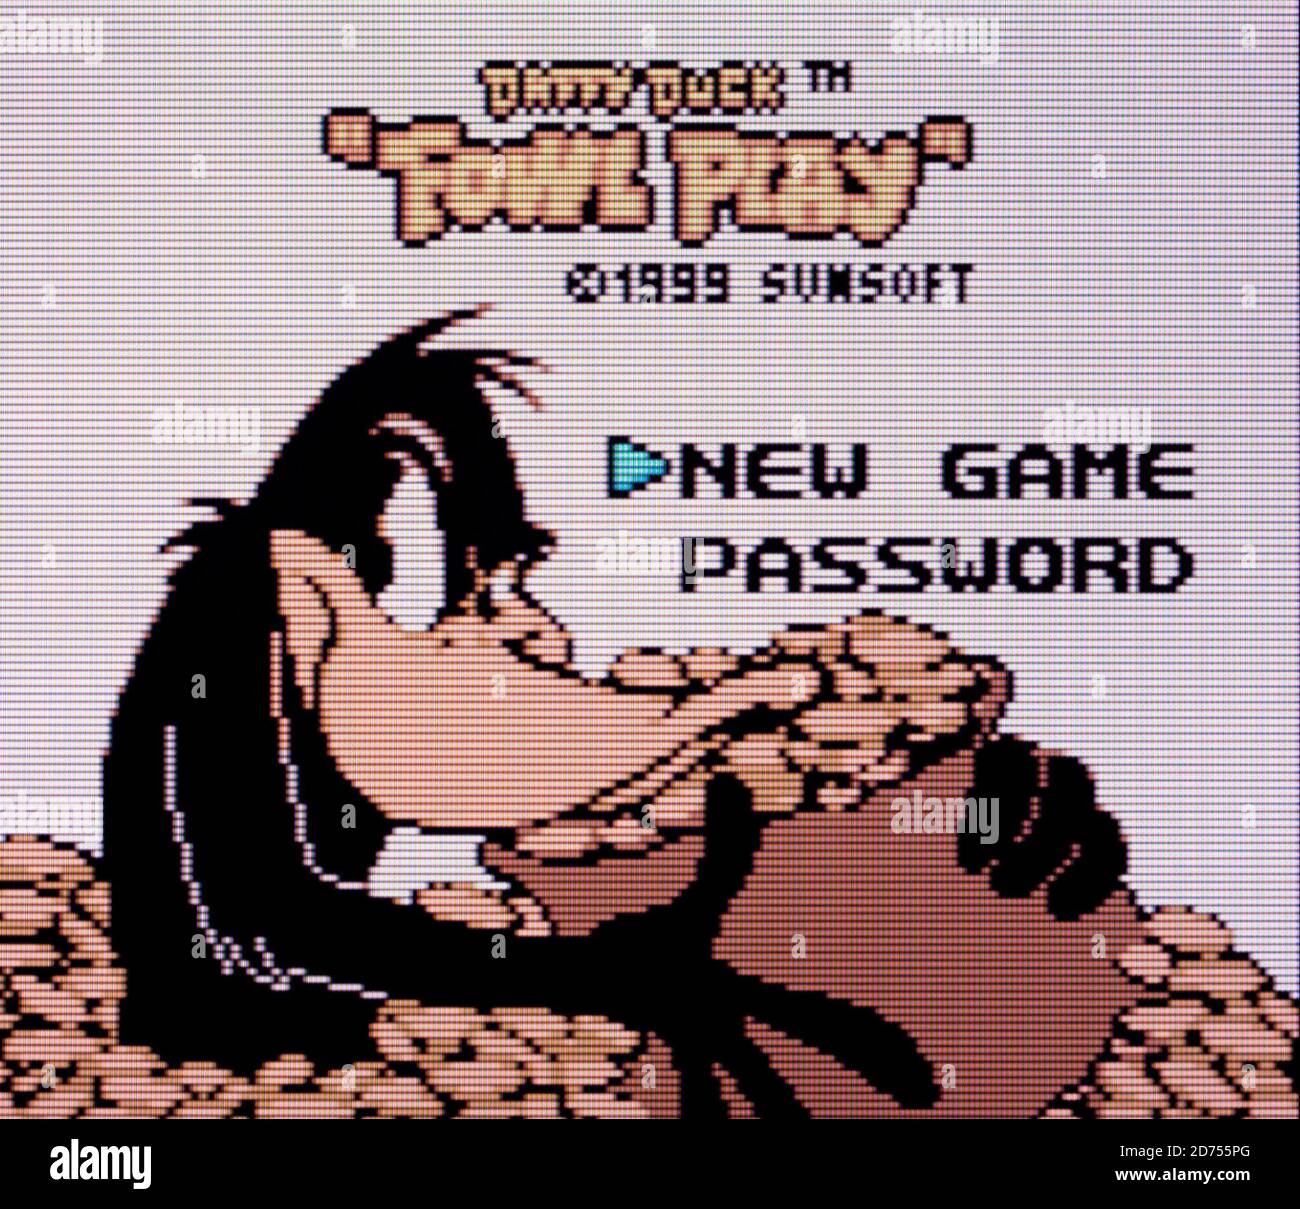 https://c8.alamy.com/comp/2D755PG/daffy-duck-fowl-play-nintendo-game-boy-color-videogame-editorial-use-only-2D755PG.jpg